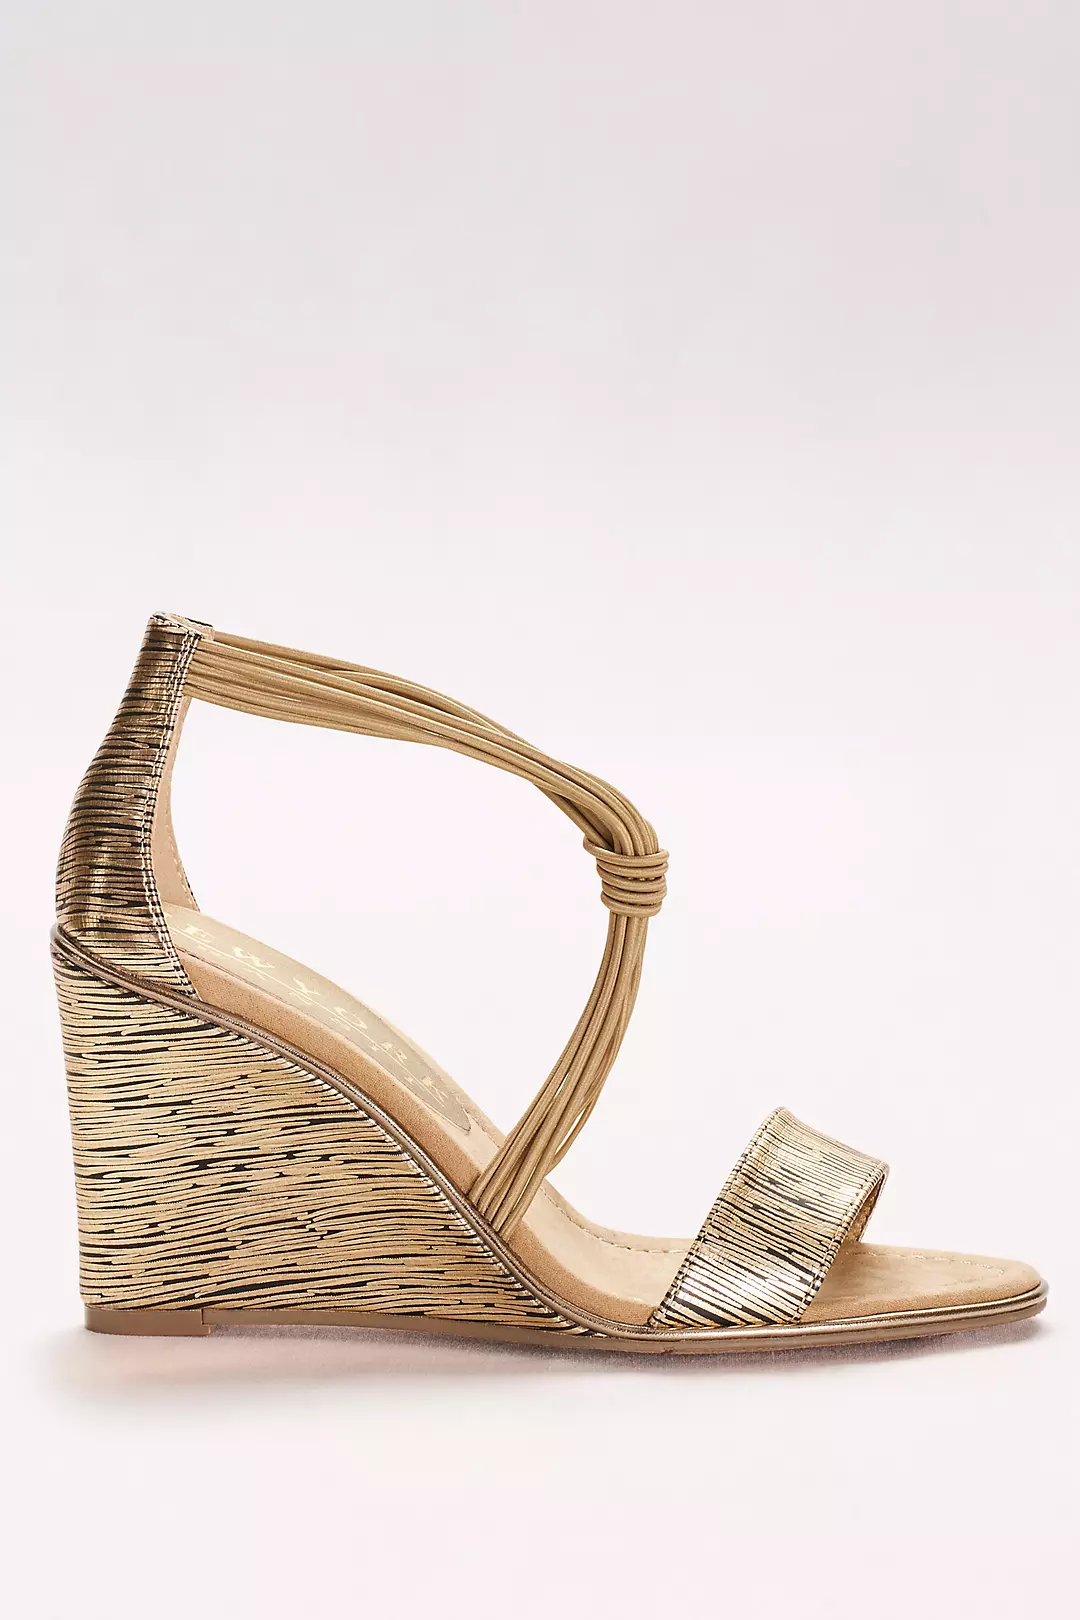 Textured Wedges with Knotted Elastic Straps   Image 3